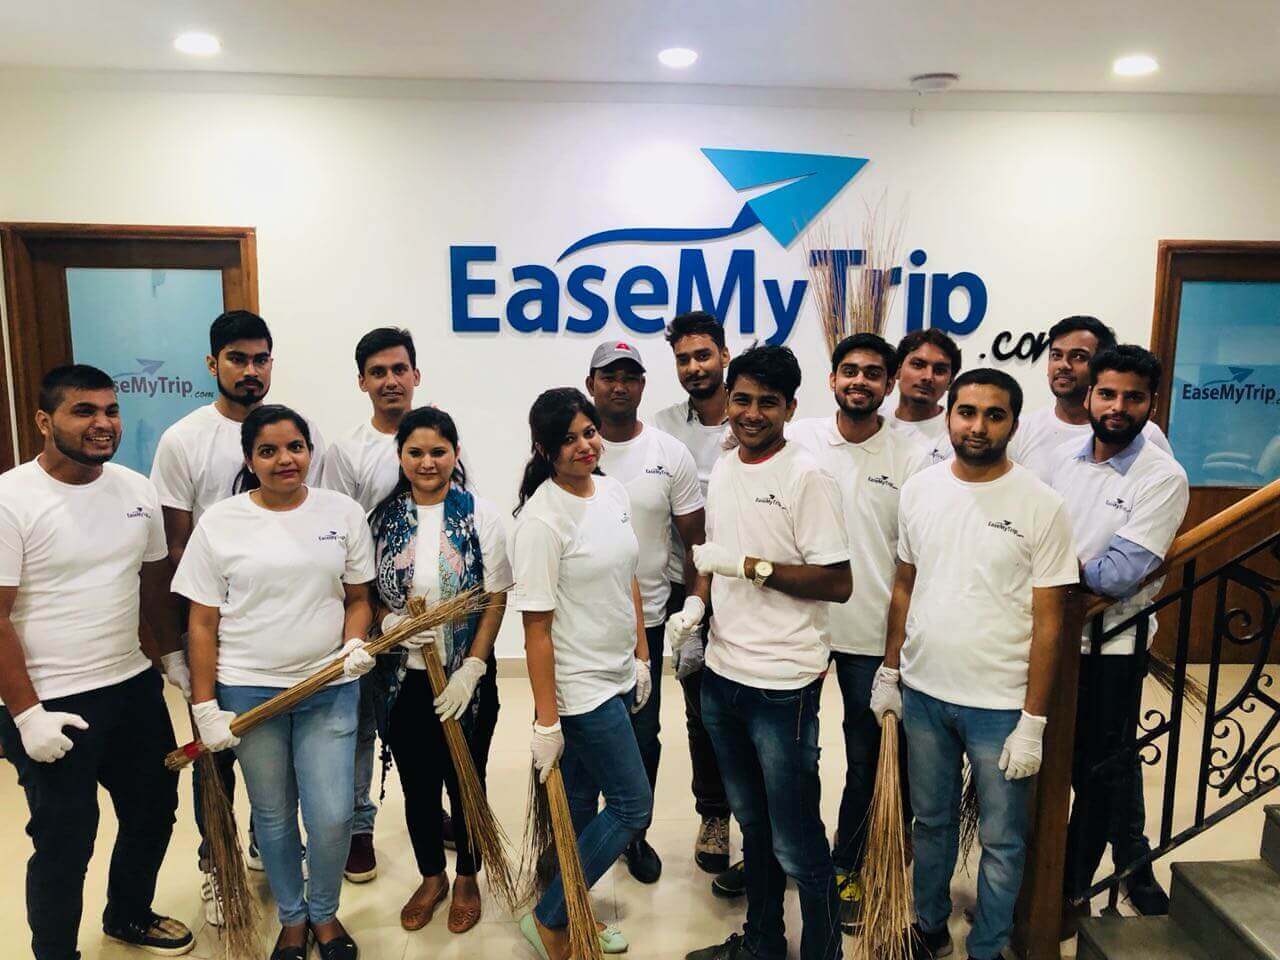 Even while the big fishes of online travel booking like MakeMyTrip and goibibo are struggling, EaseMyTrip claims to be profit